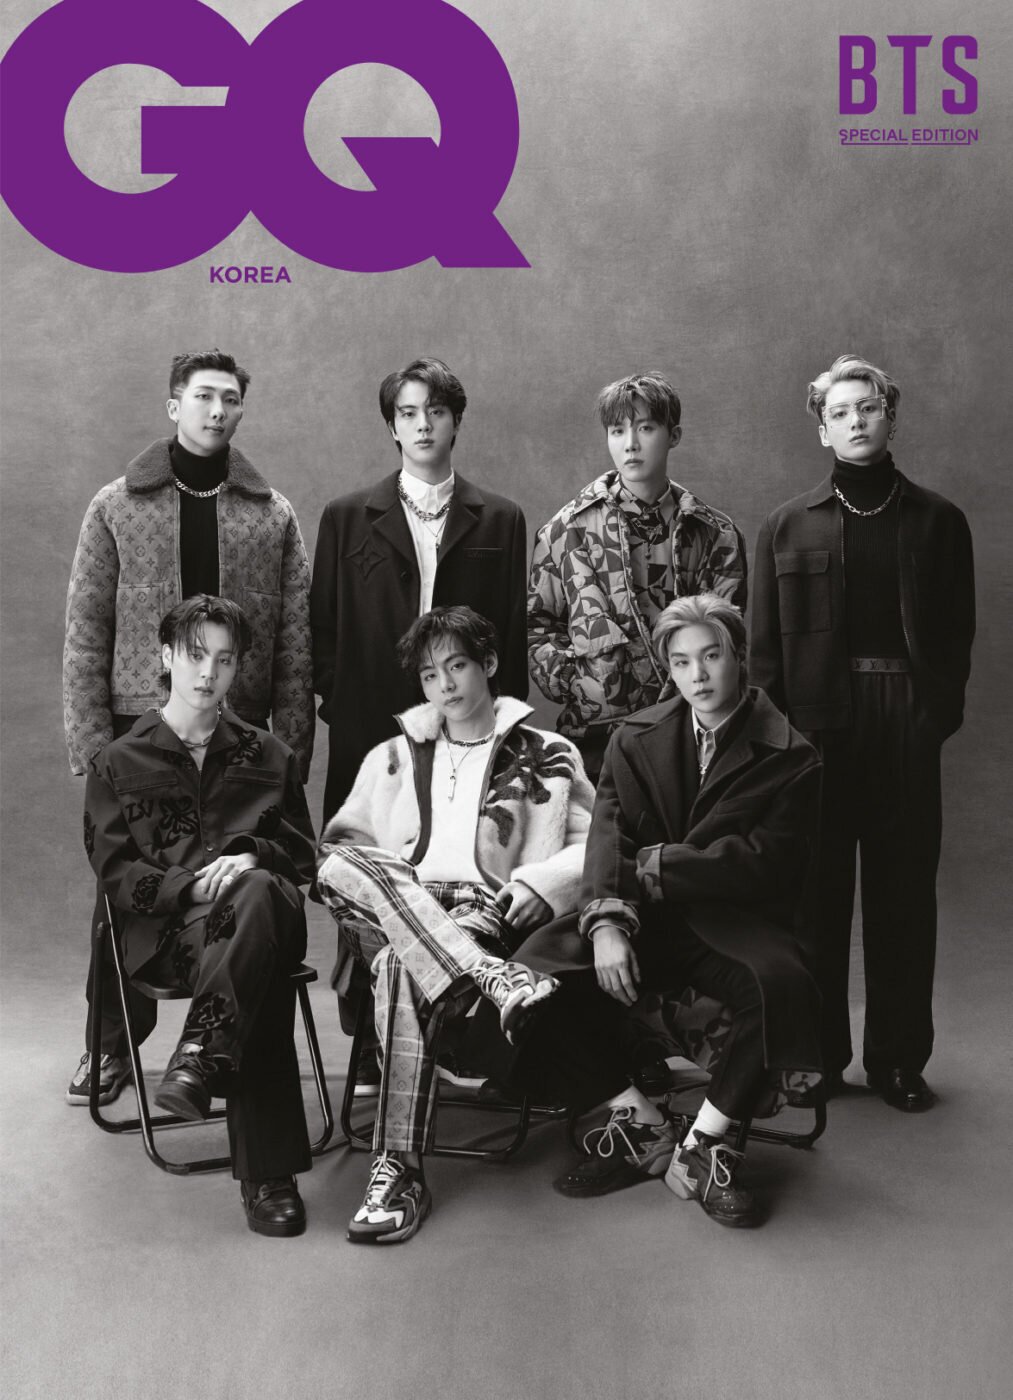 BTS for GQ Korea 2021 Special Edition Magazine | kpopping